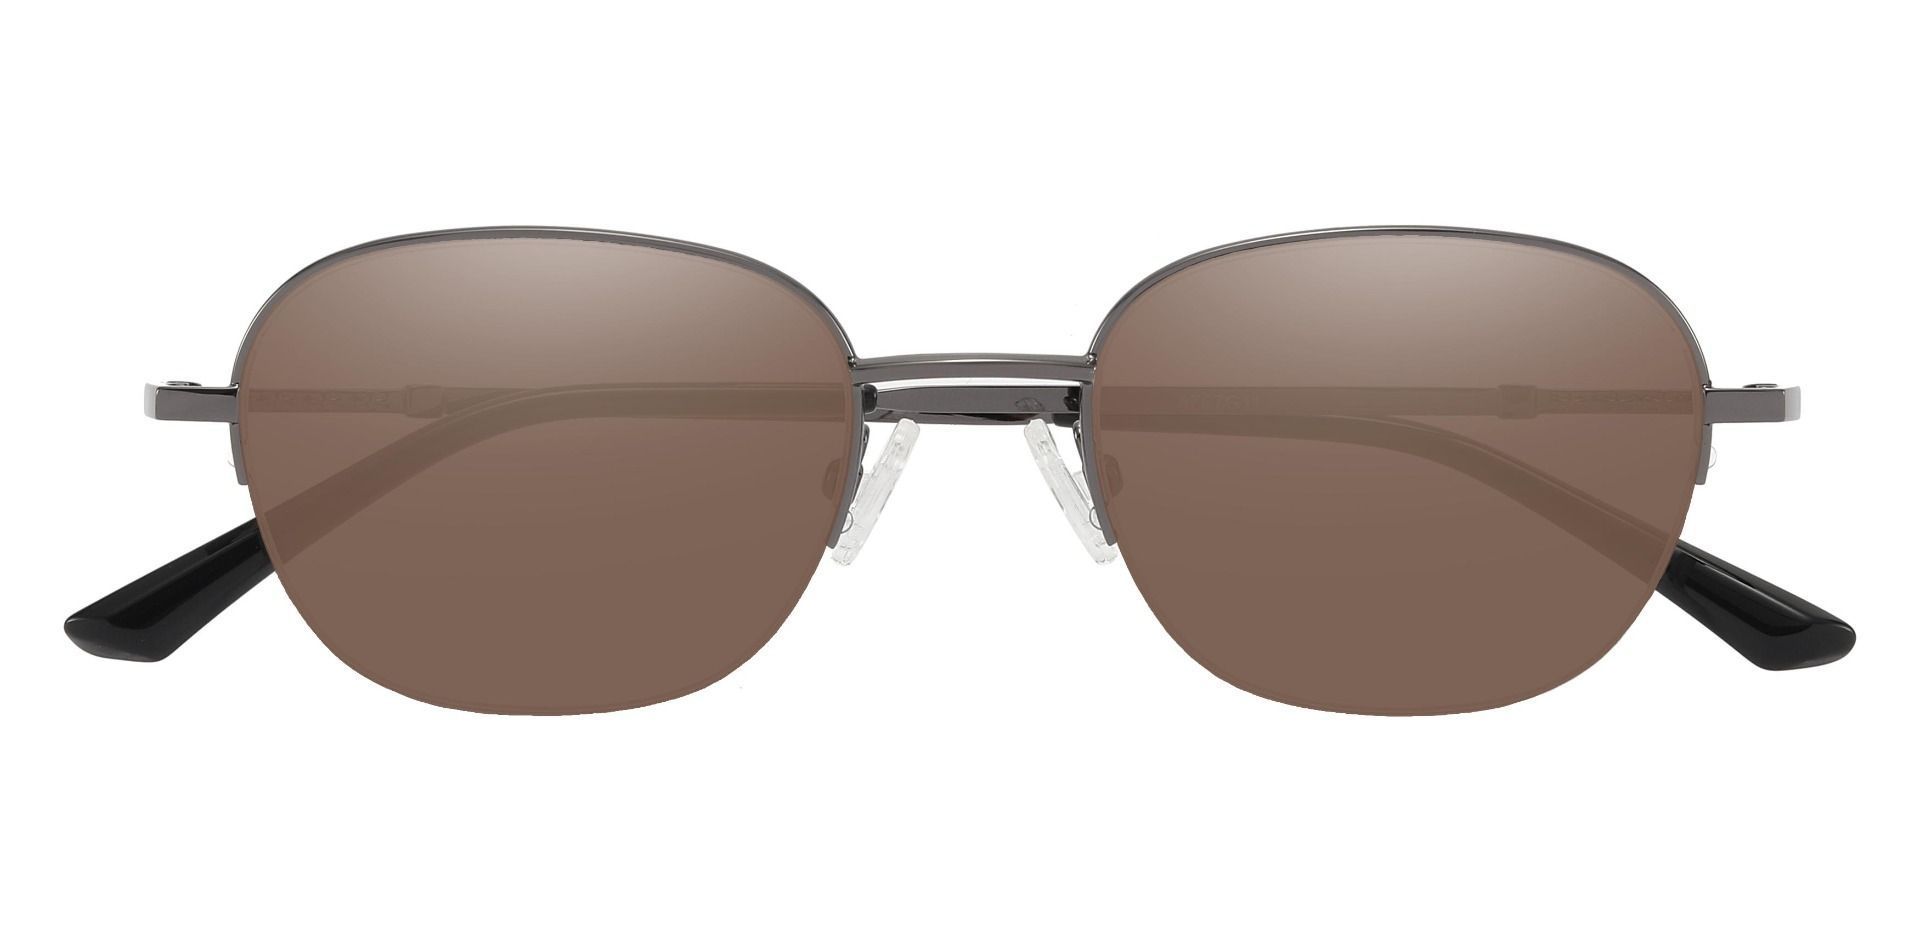 Rochester Oval Reading Sunglasses - Gray Frame With Brown Lenses